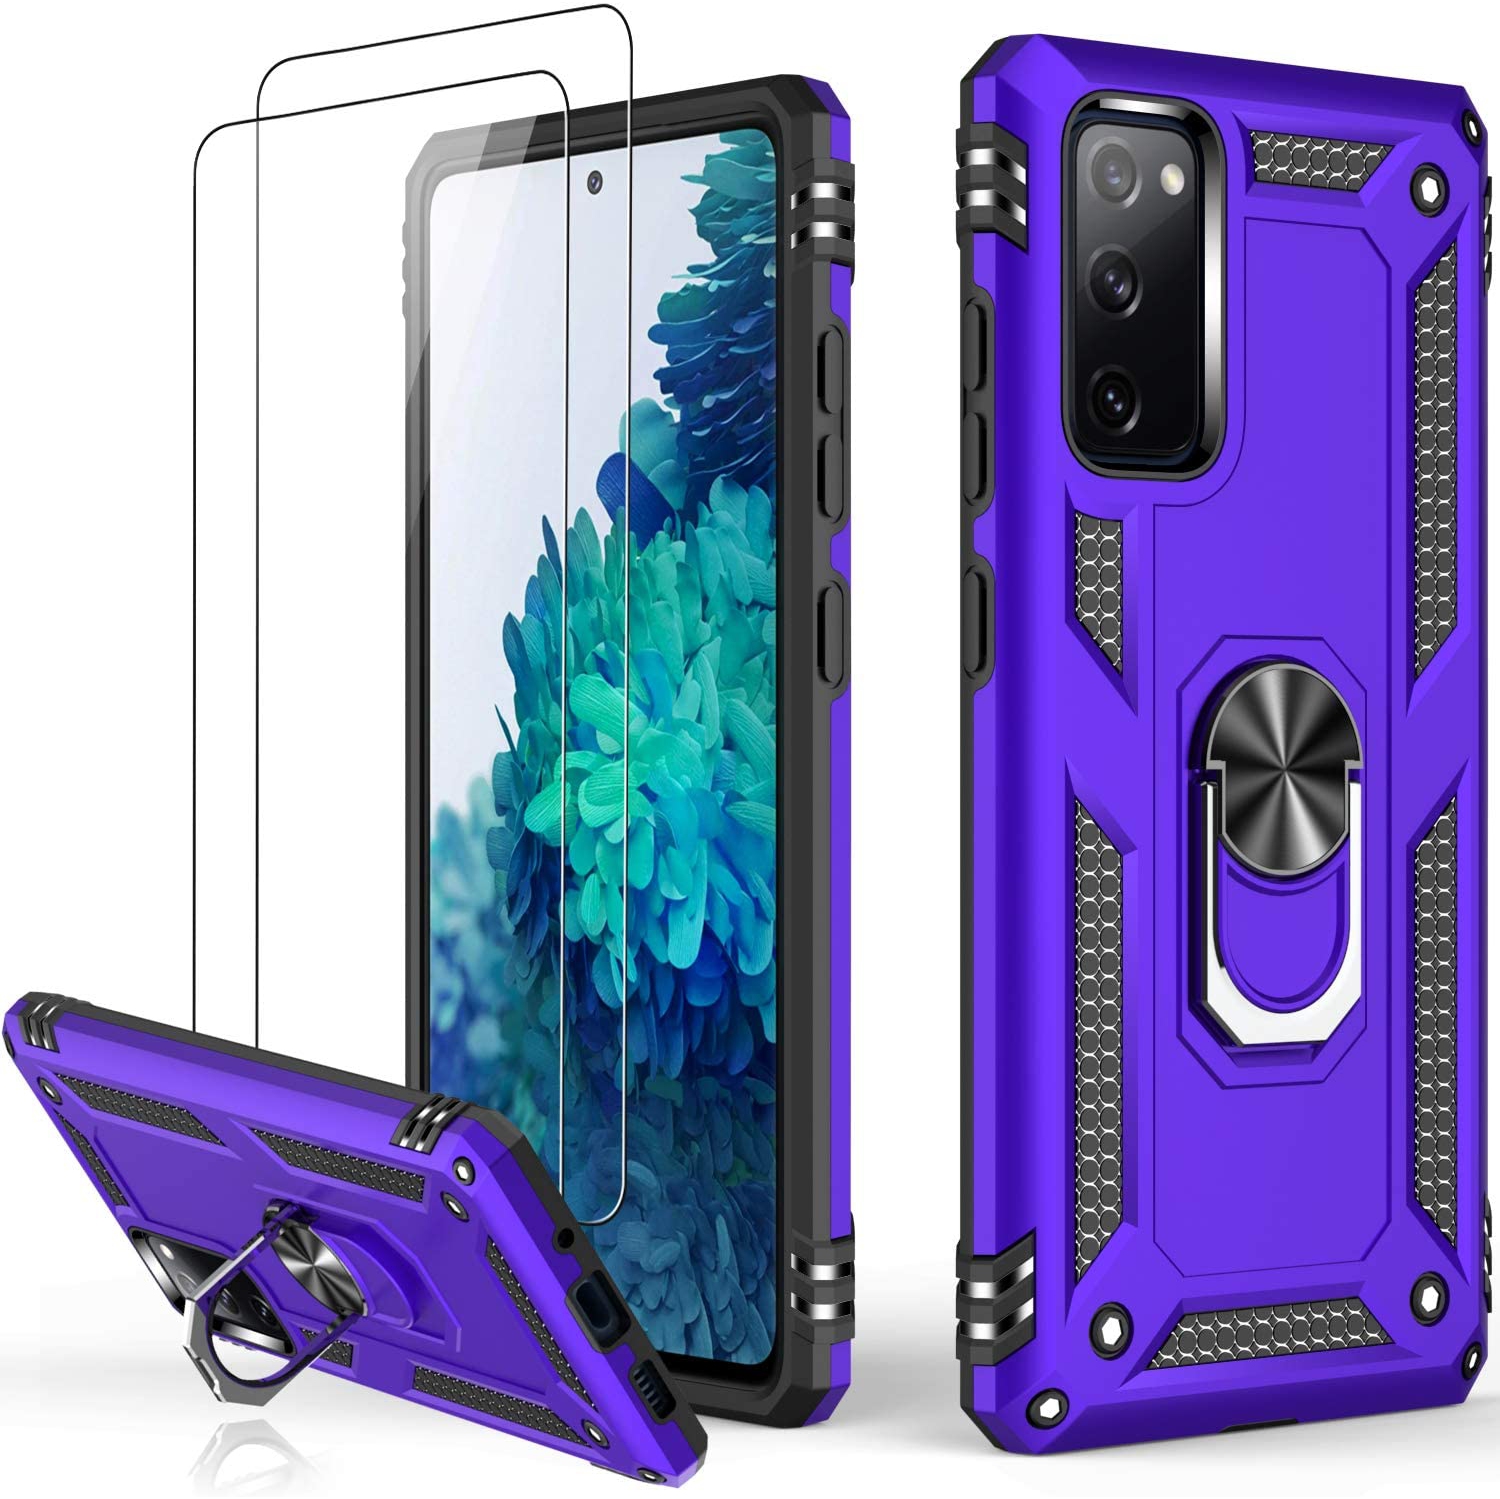 Galaxy S20 FE Case,Pass 16ft. Drop Tested Military Grade Cover with Magnetic Ring Kickstand Compatible with Car Mount Holder,Protective Phone Case for Samsung Galaxy S20 FE